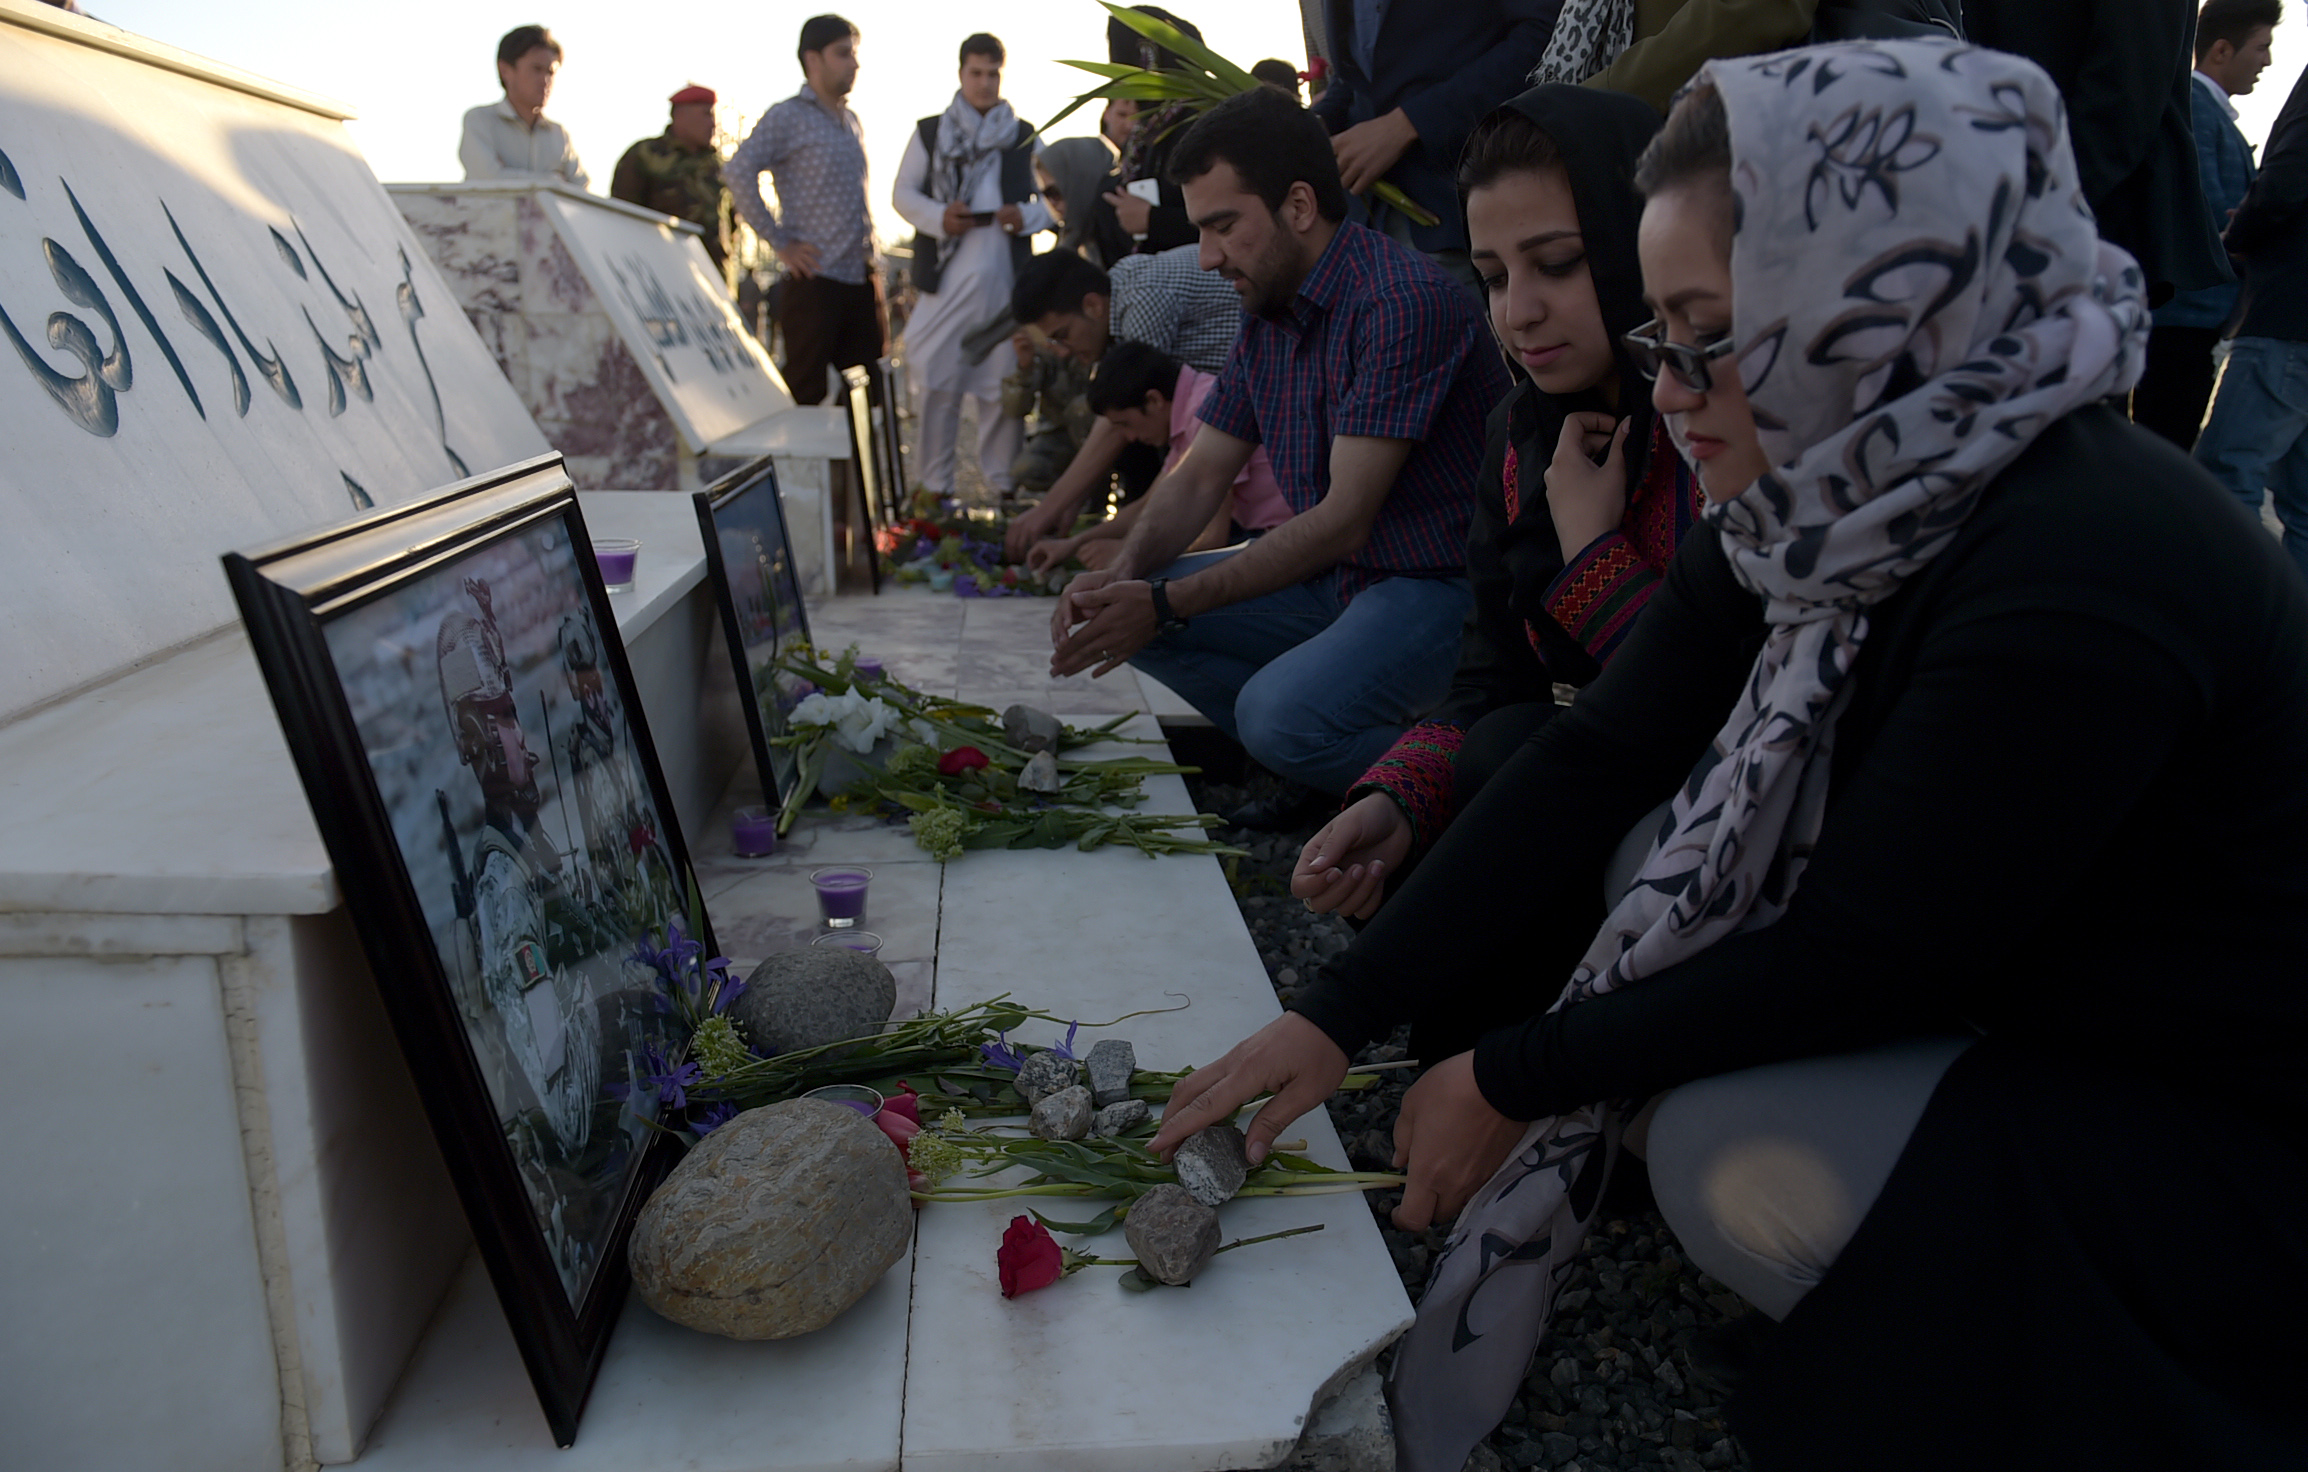 Afghans pay tribute to the victims of a Taliban attack on an army base on the Wazir Akbar Khan hilltop in Kabul on April 23, 2017. (Wakil Kohsar—AFP/Getty Images)